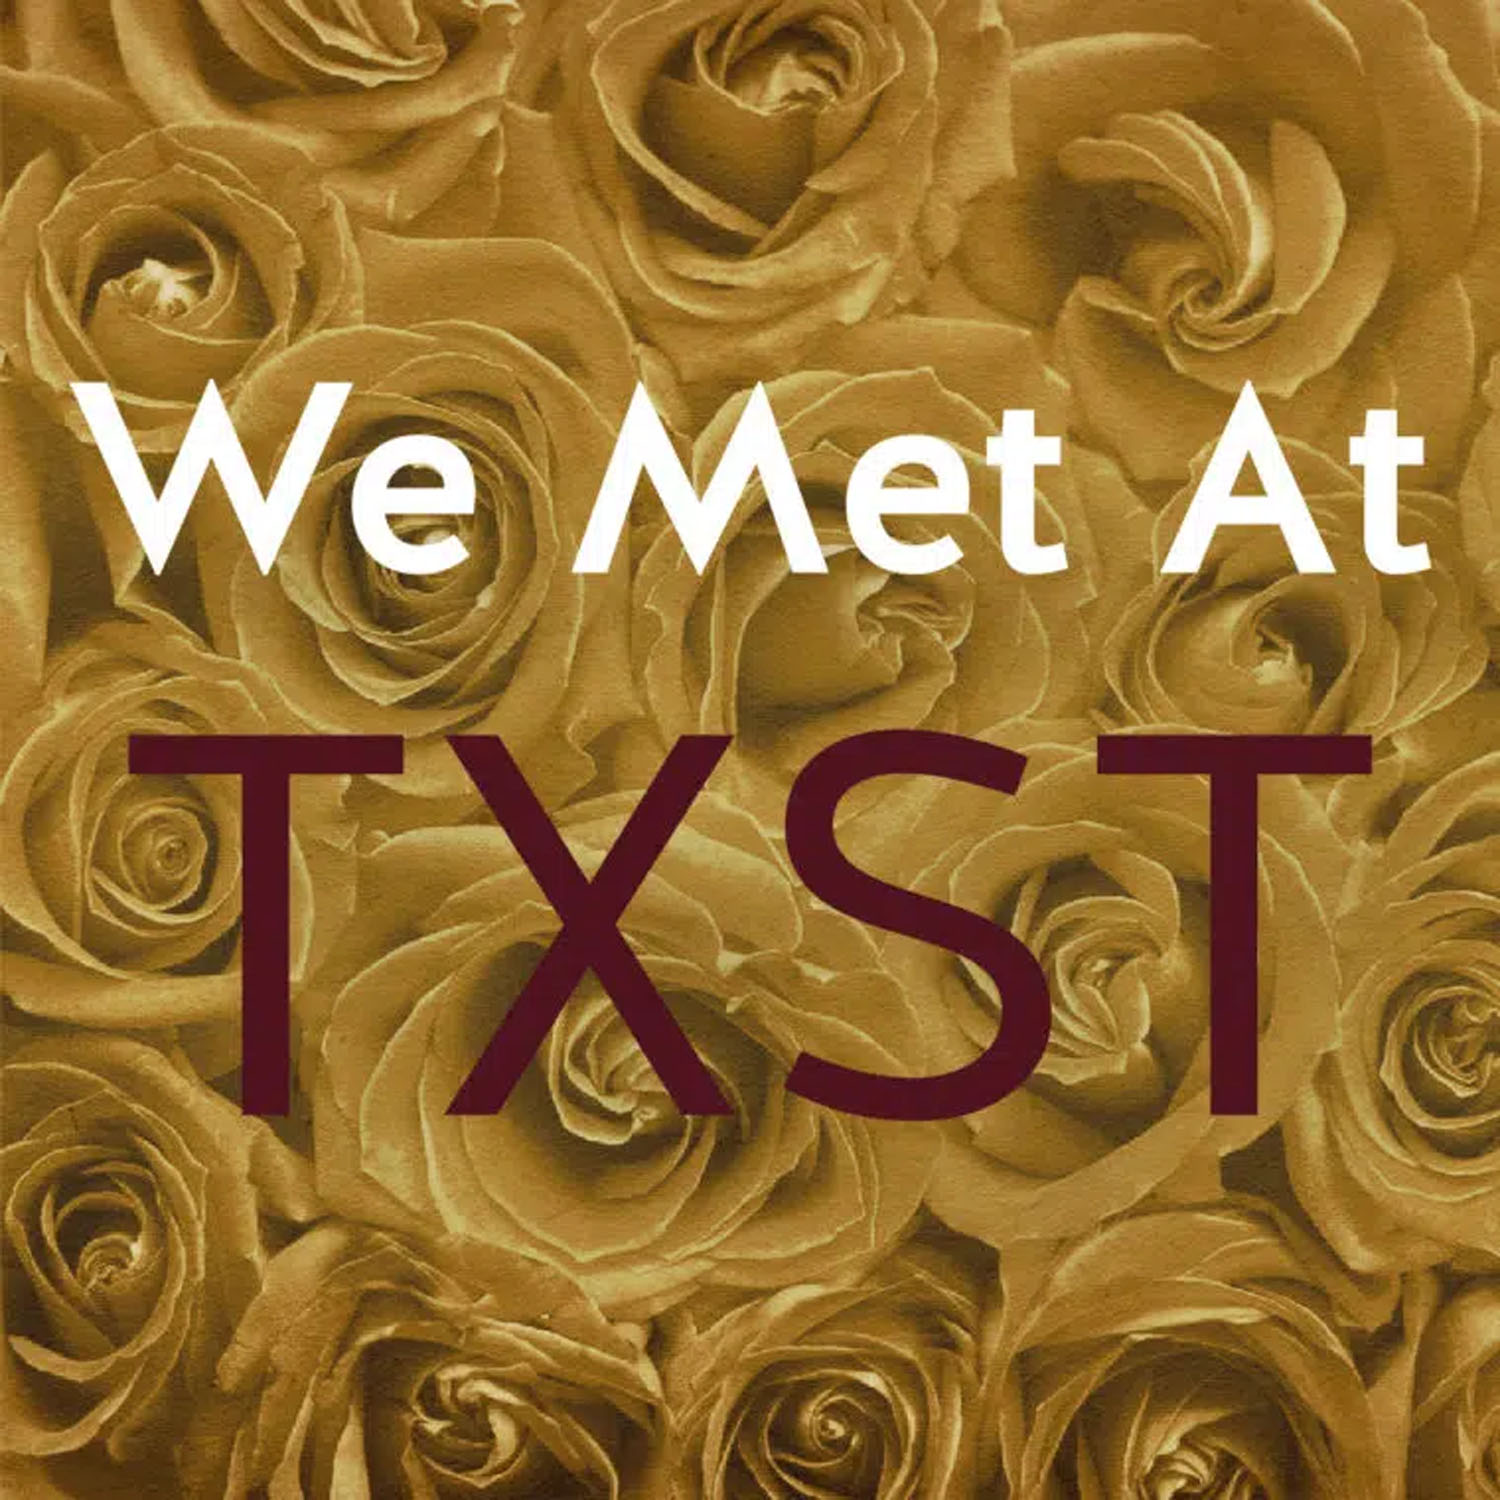 Gold spotify album cover reading "We met at TXST"